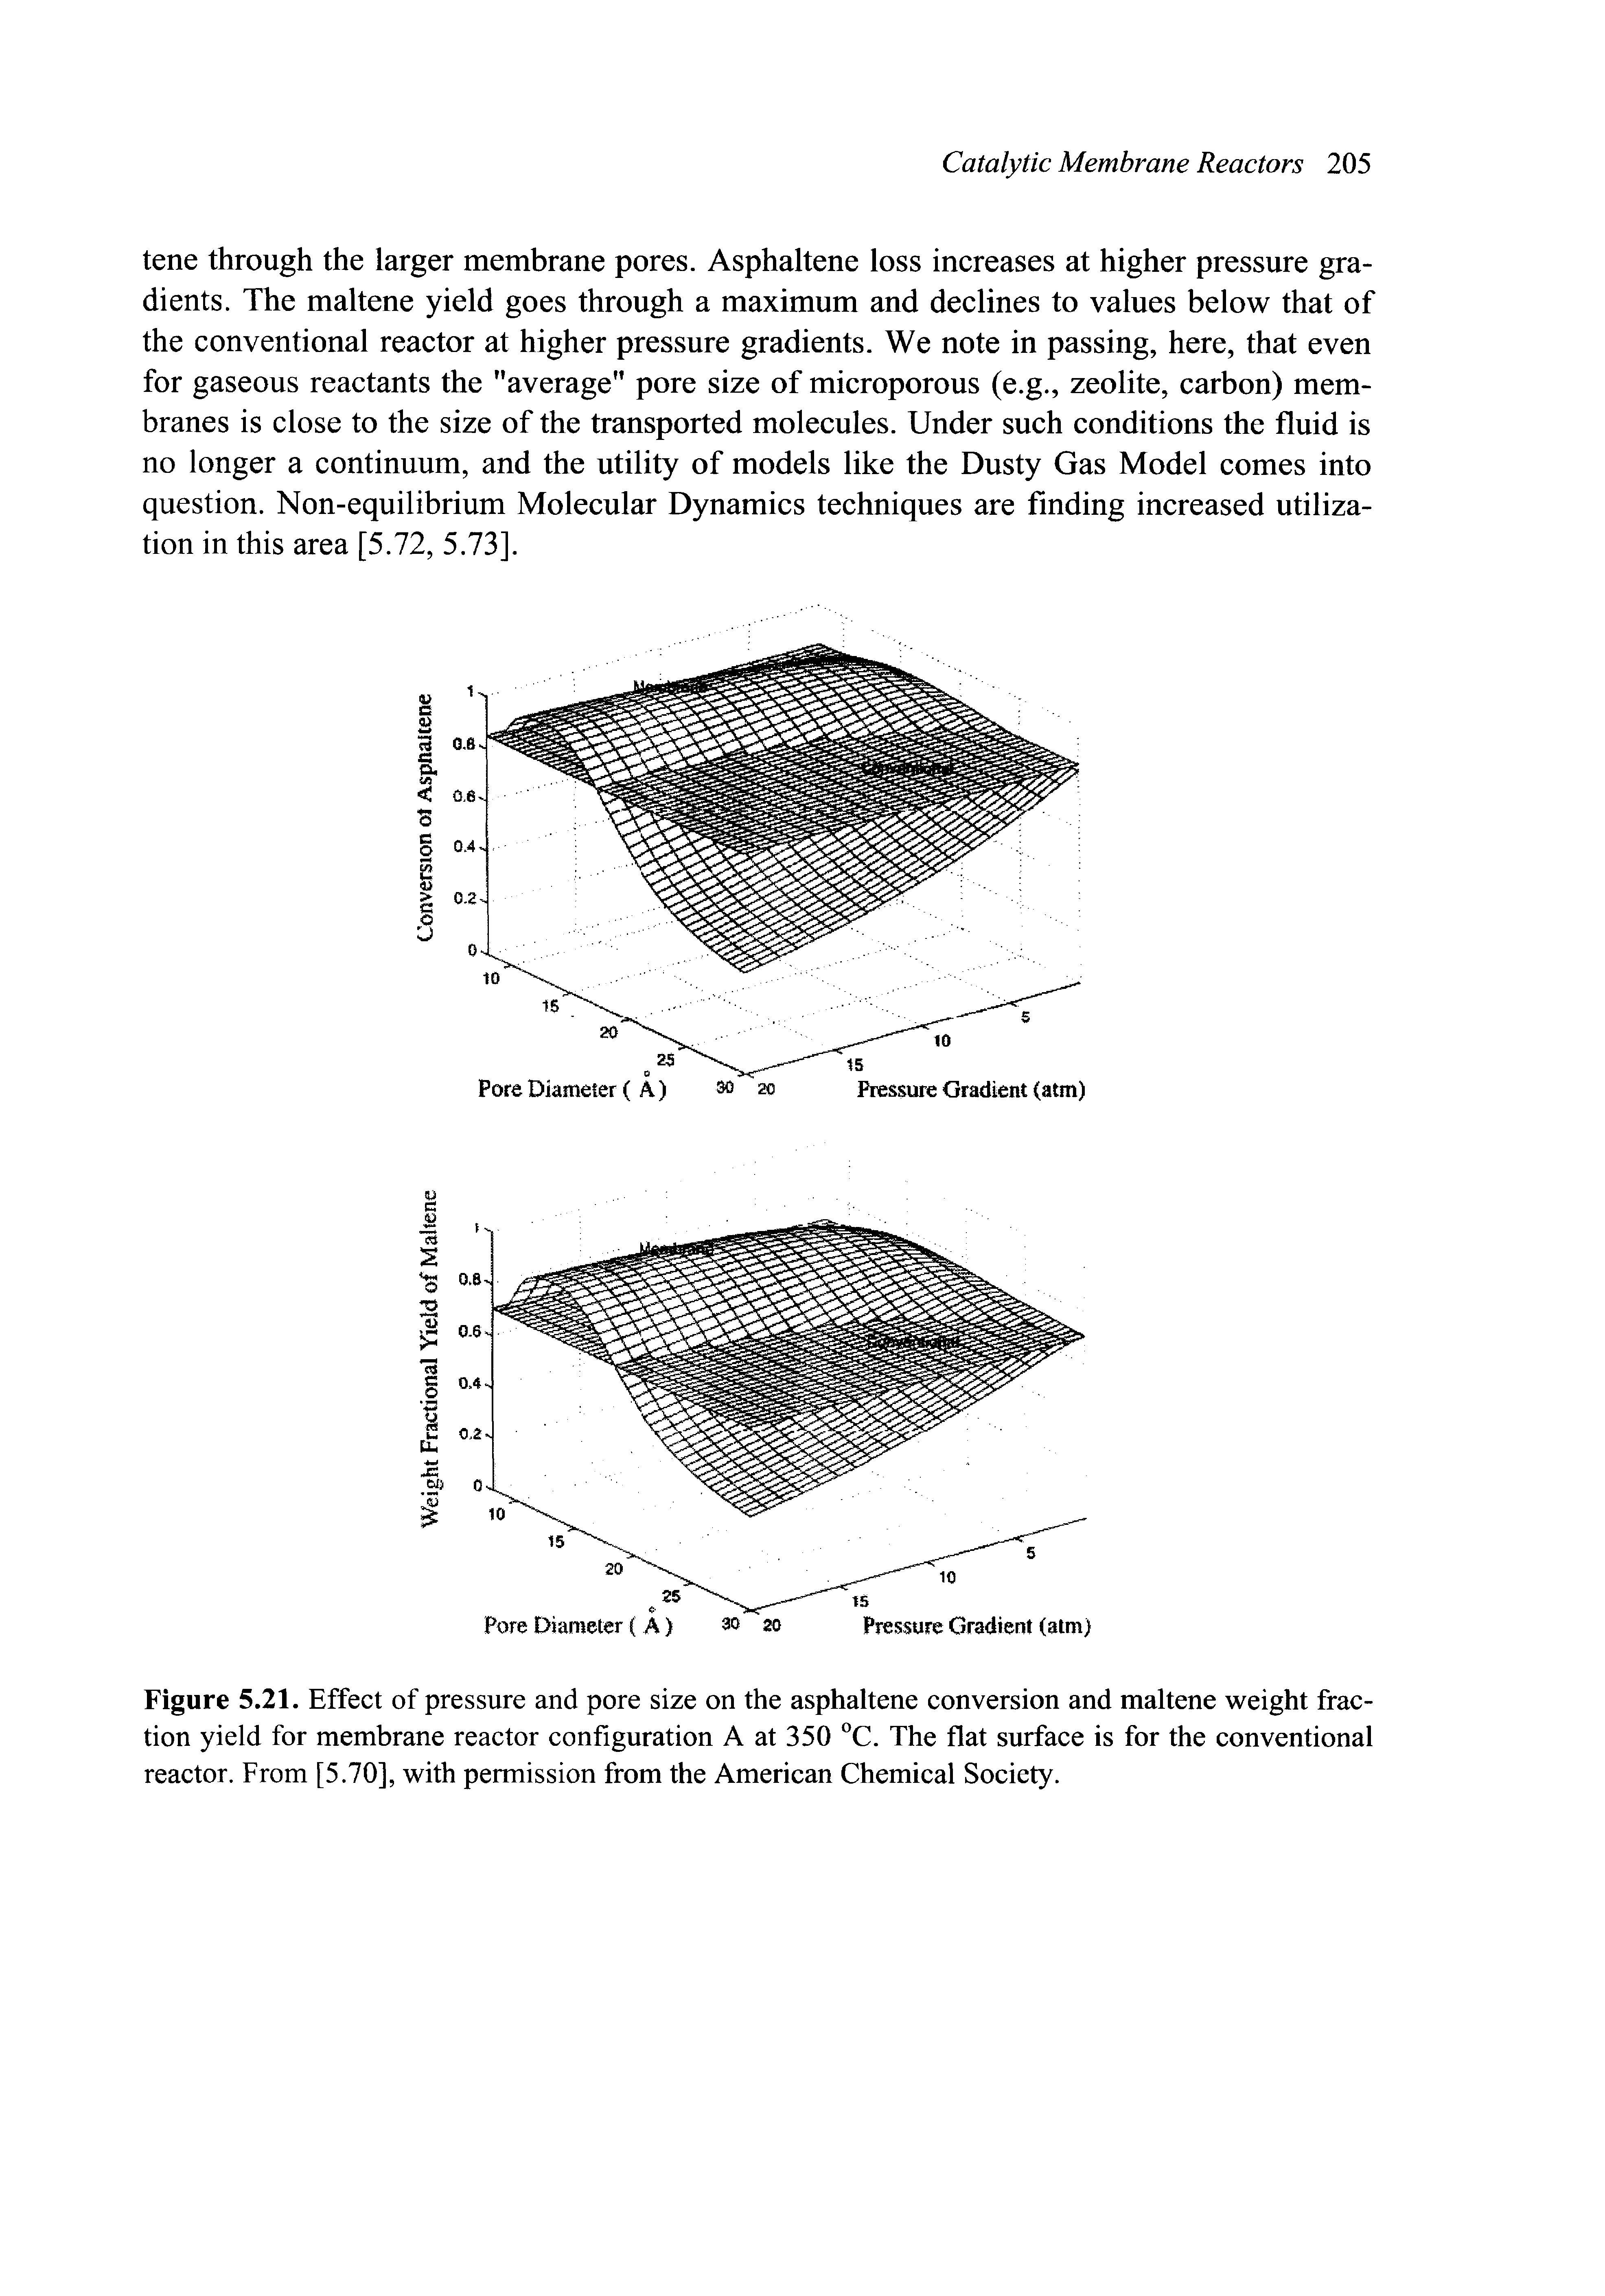 Figure 5.21. Effect of pressure and pore size on the asphaltene conversion and maltene weight fraction yield for membrane reactor configuration A at 350 The flat surface is for the conventional reactor. From [5.70], with permission from the American Chemical Society.